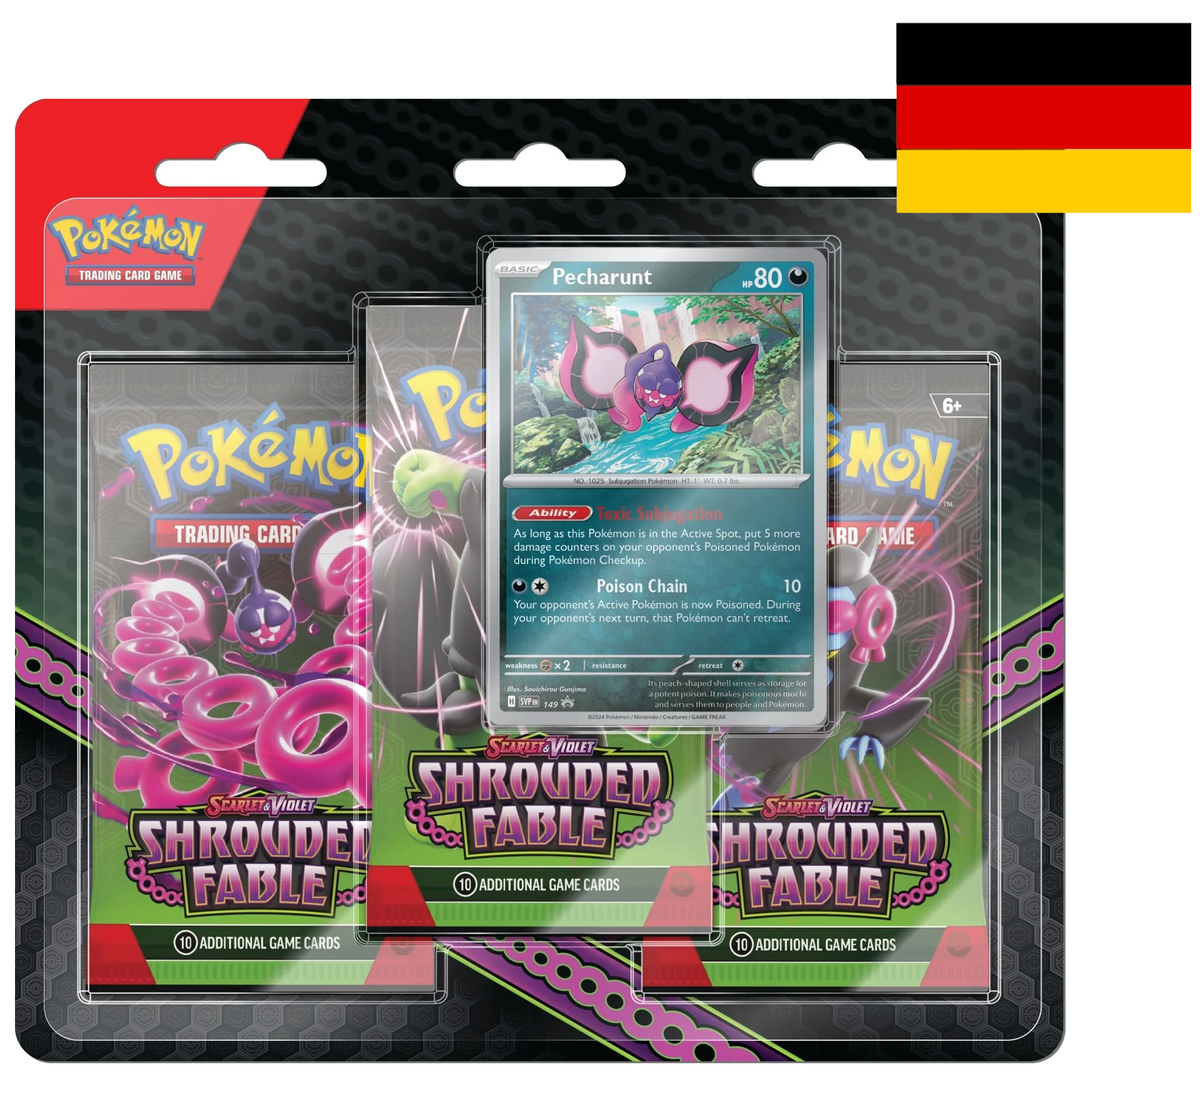 Scarlet & Violet - Shrouded Fable Three-Booster Pack and Promo Card Blister - Deutsch - Vorbestellung 02.08.*